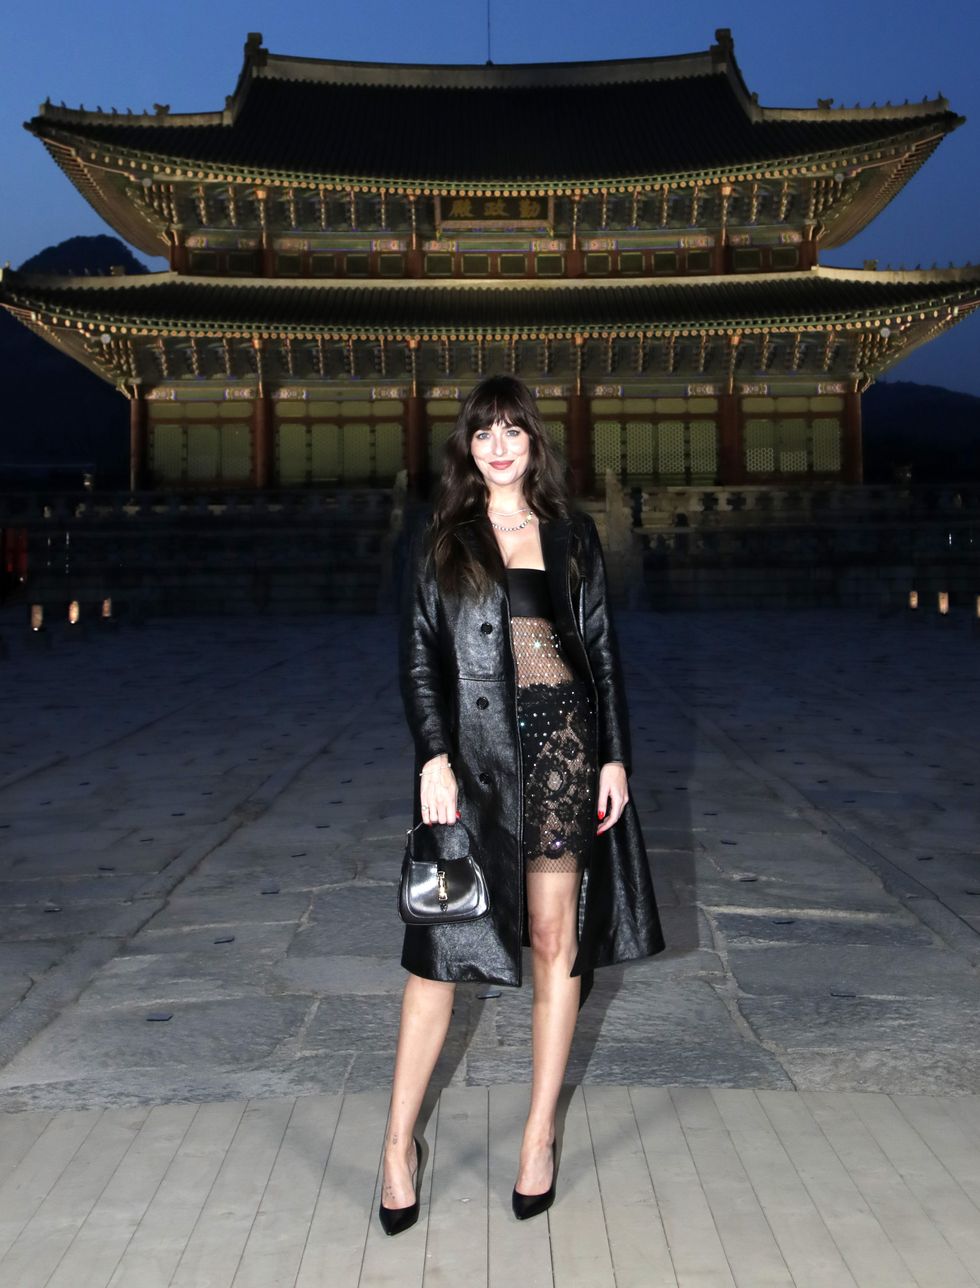 seoul, south korea may 16 dakota johnson attends the gucci seoul cruise 2024 fashion show at gyeongbokgung palace on may 16, 2023 in seoul, south korea photo by han myung gugetty images for gucci